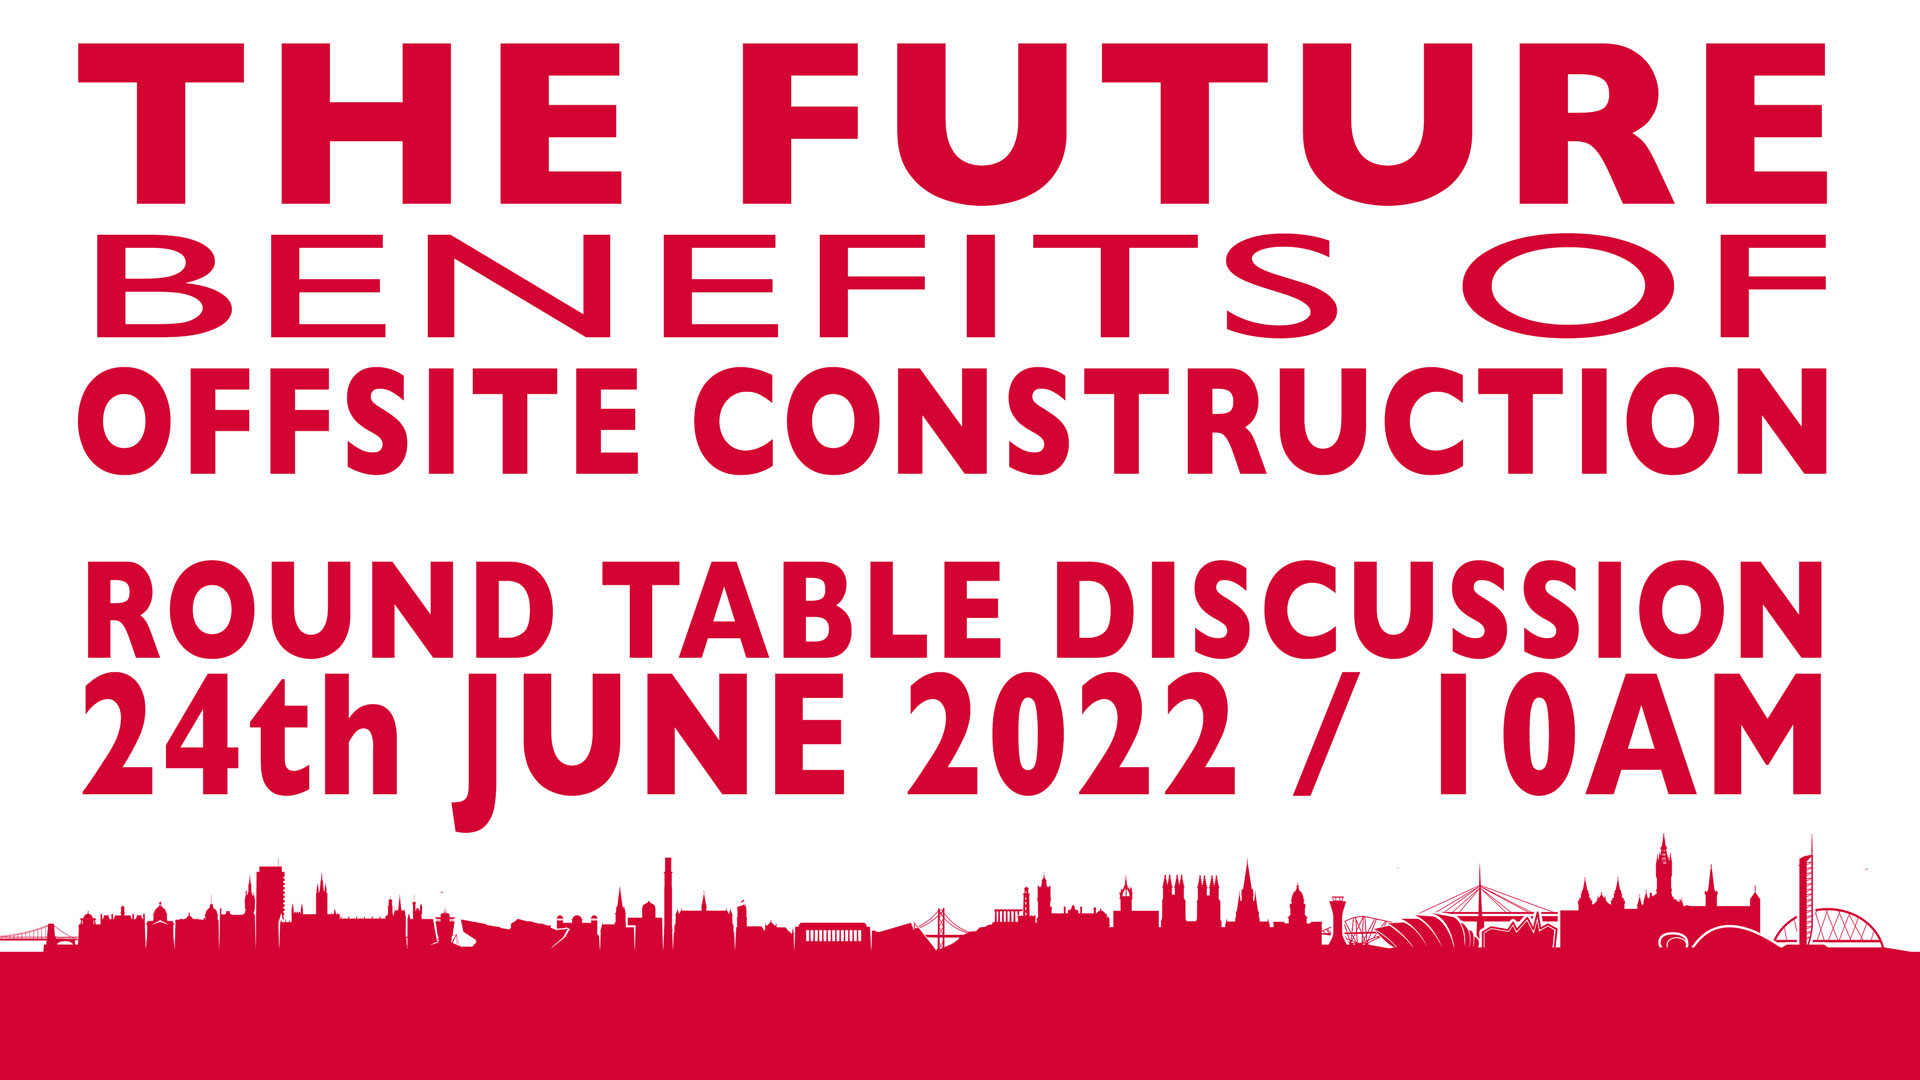 Welcome to our webinar, "The Future Benefits of Offsite Construction". Hosted by Keira Proctor, the panel will feature leading figures from the modular construction industry in the UK.